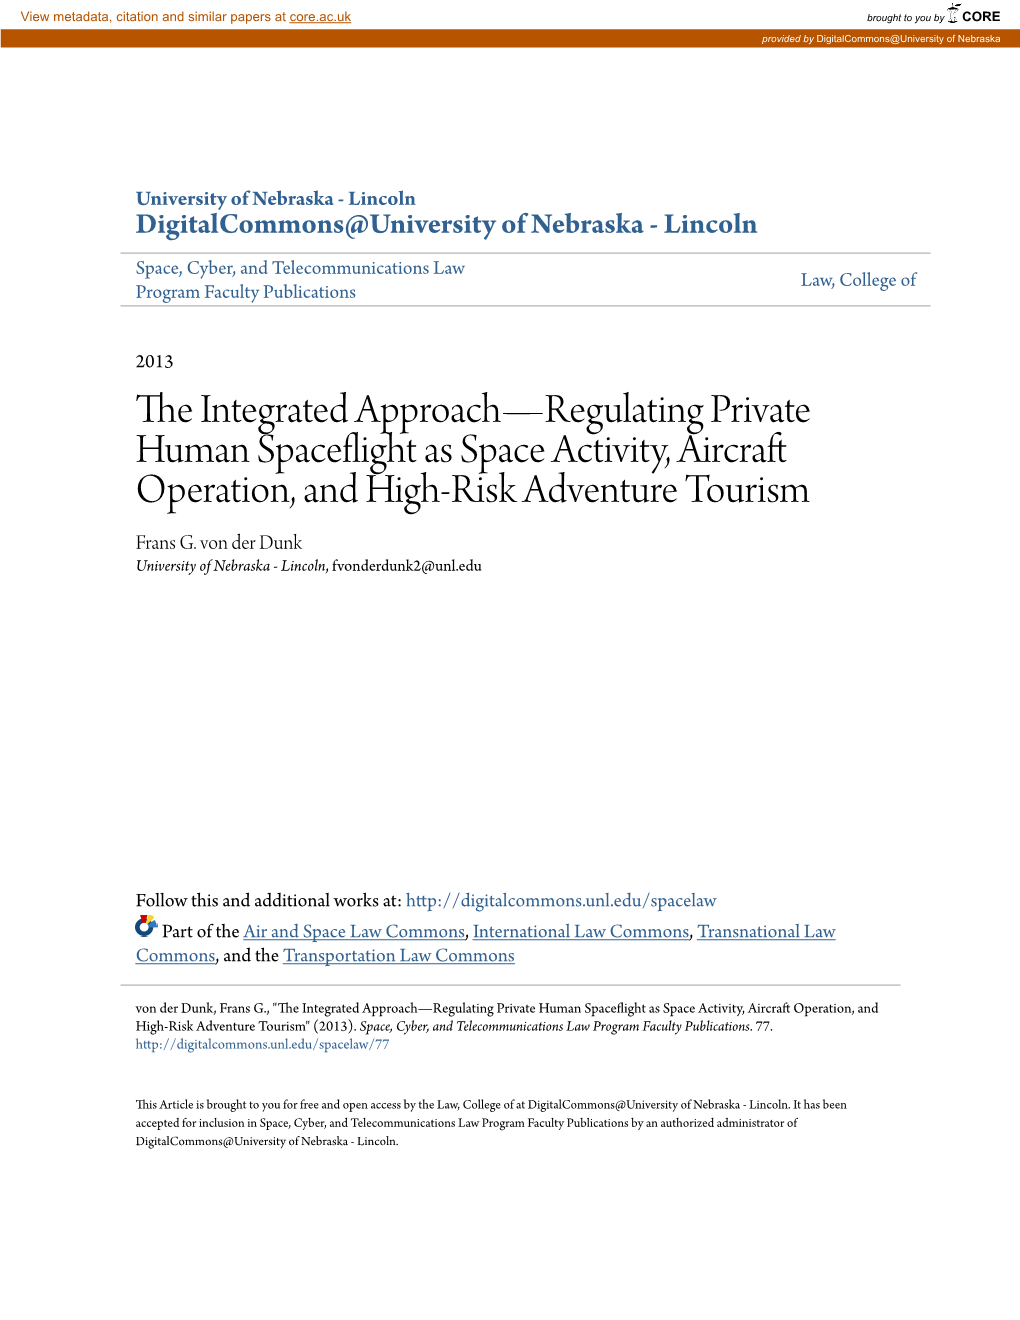 The Integrated Approach—Regulating Private Human Spaceflight As Space Activity, Aircraft Operation, and High-Risk Adventure Tourism